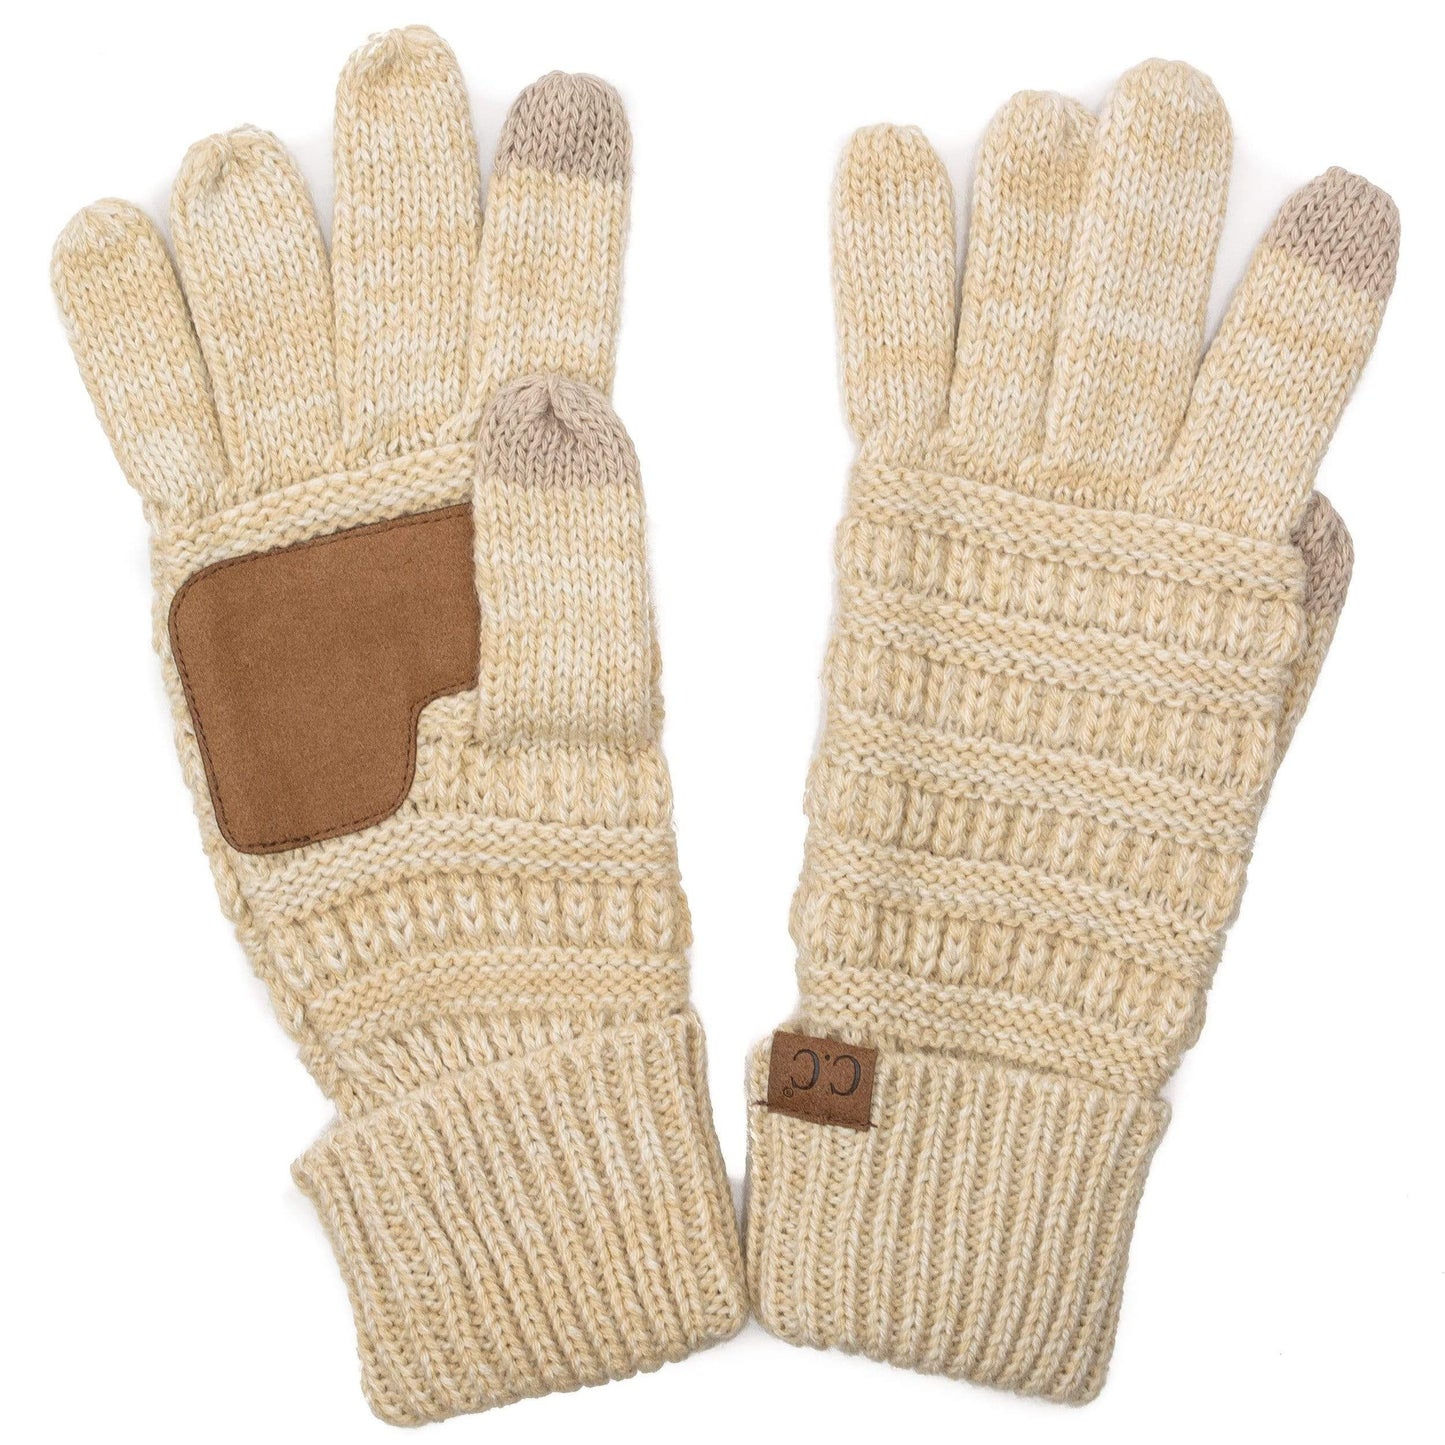 C.C Apparel Beige/Ivory C.C Unisex Cable Knit Winter Warm Anti-Slip Two-Toned Touchscreen Texting Gloves